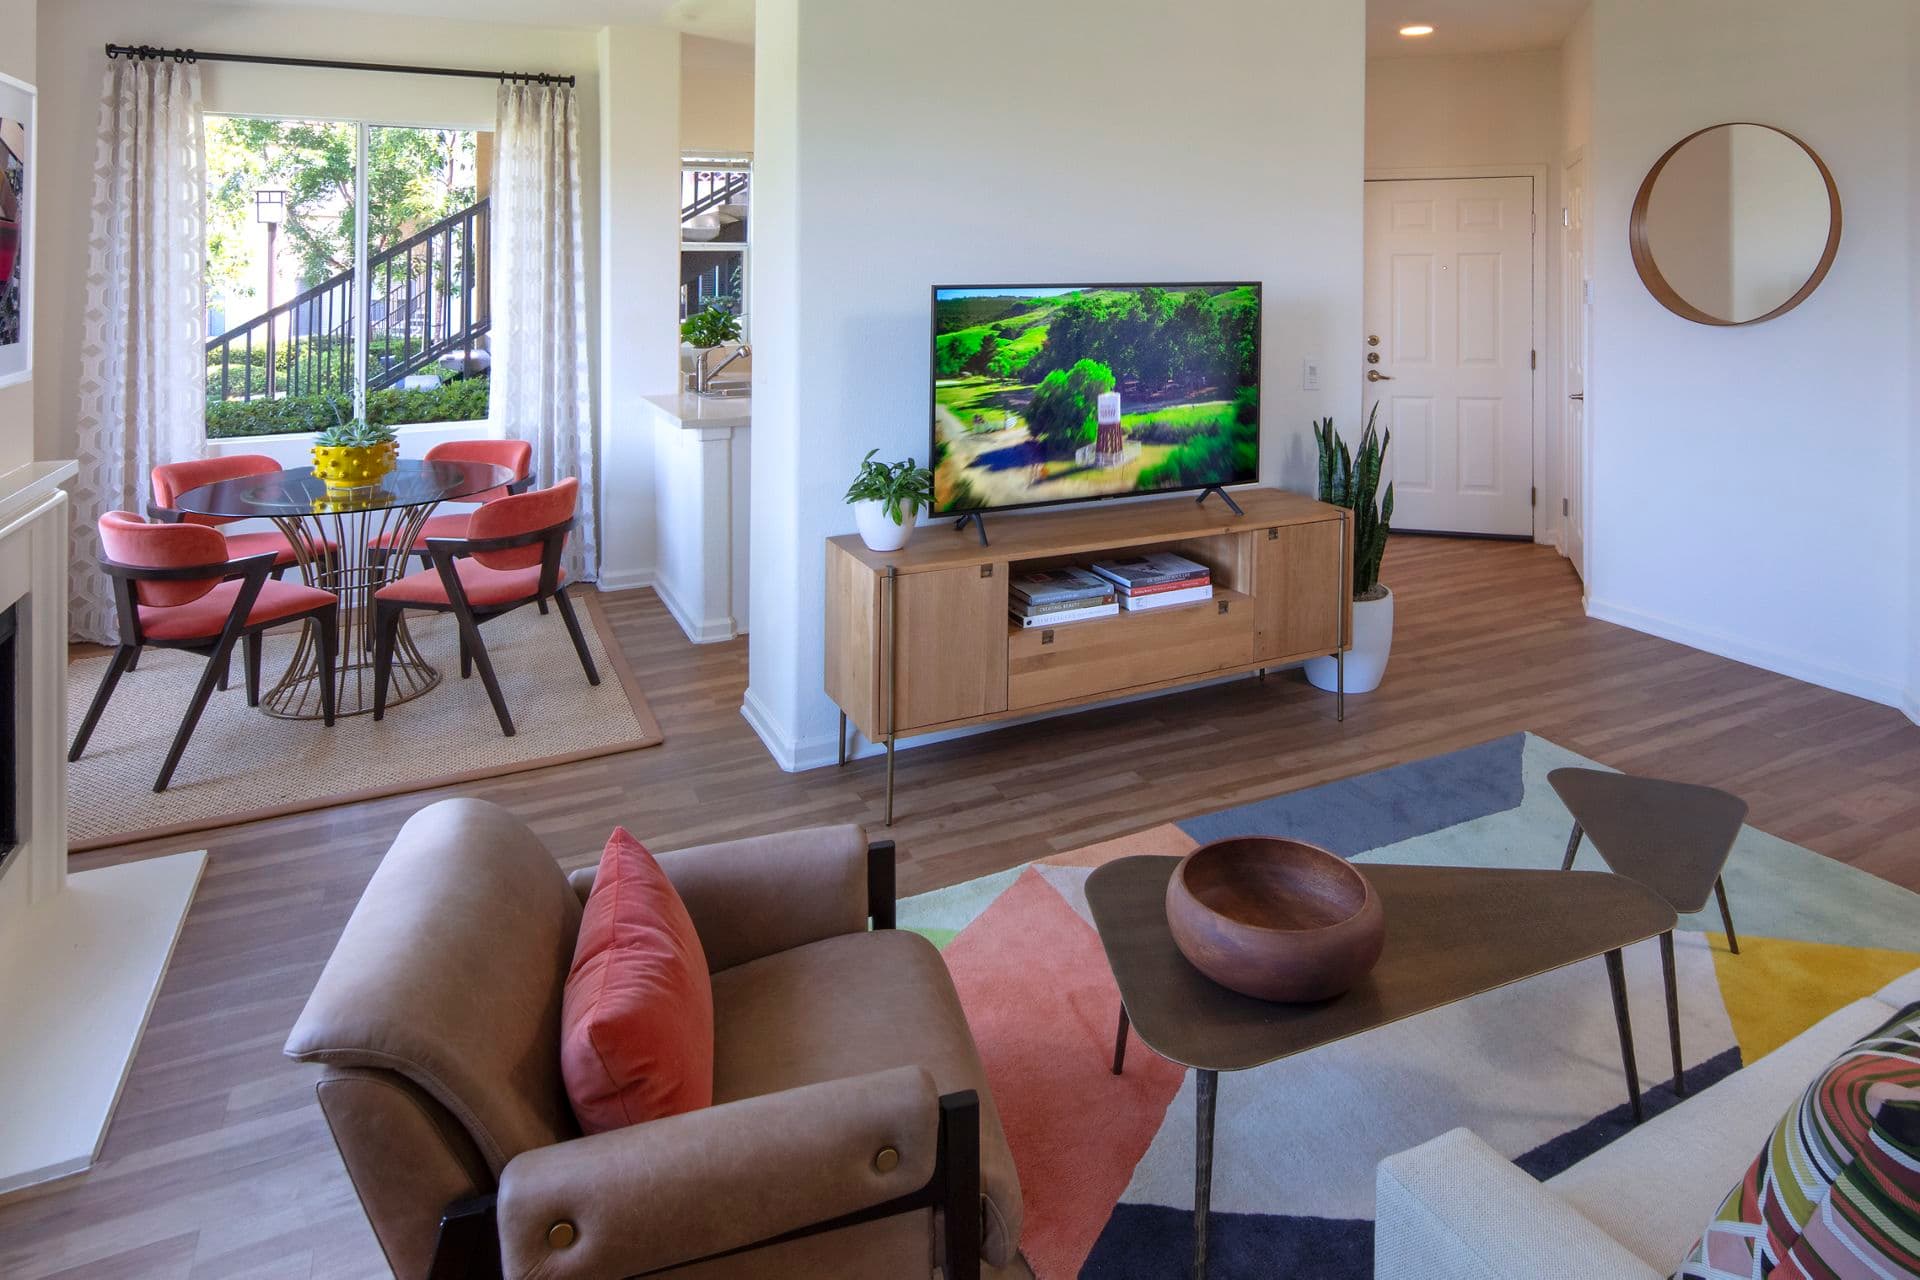 Interior view of living room and dining room at Vista Real Apartment Homes in Mission Viejo, CA.